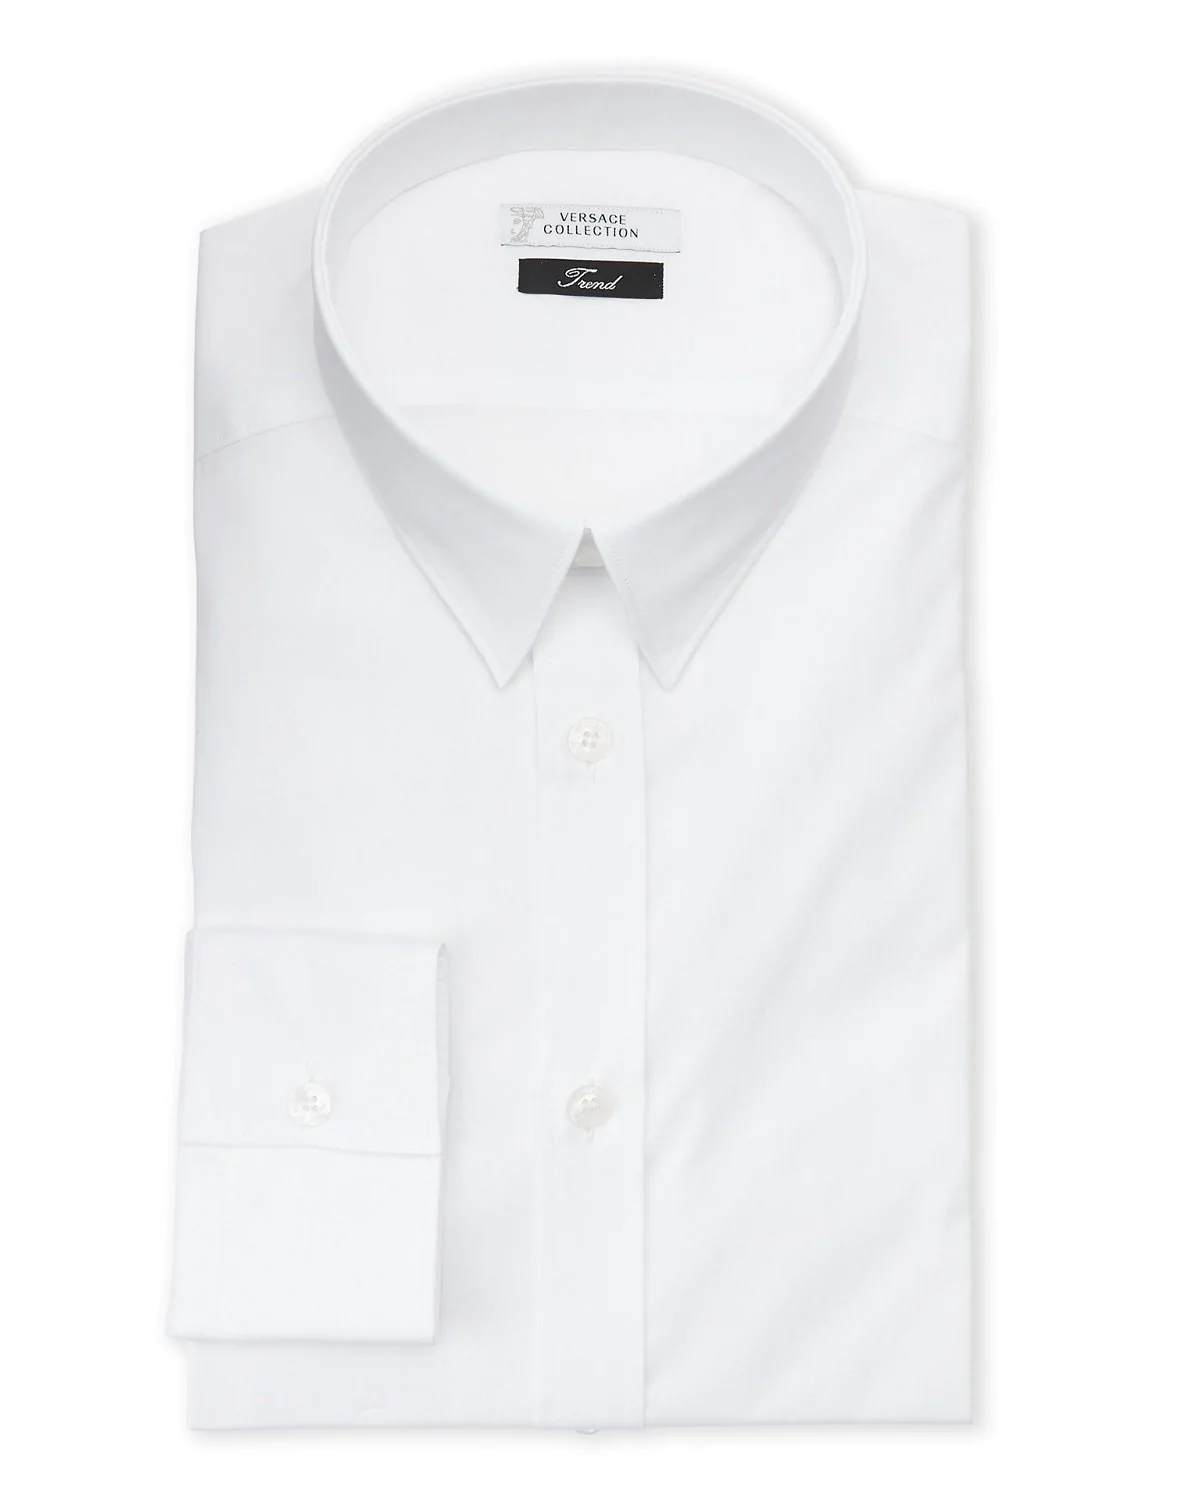 VERSACE COLLECTION City Fit Dress Shirt, White